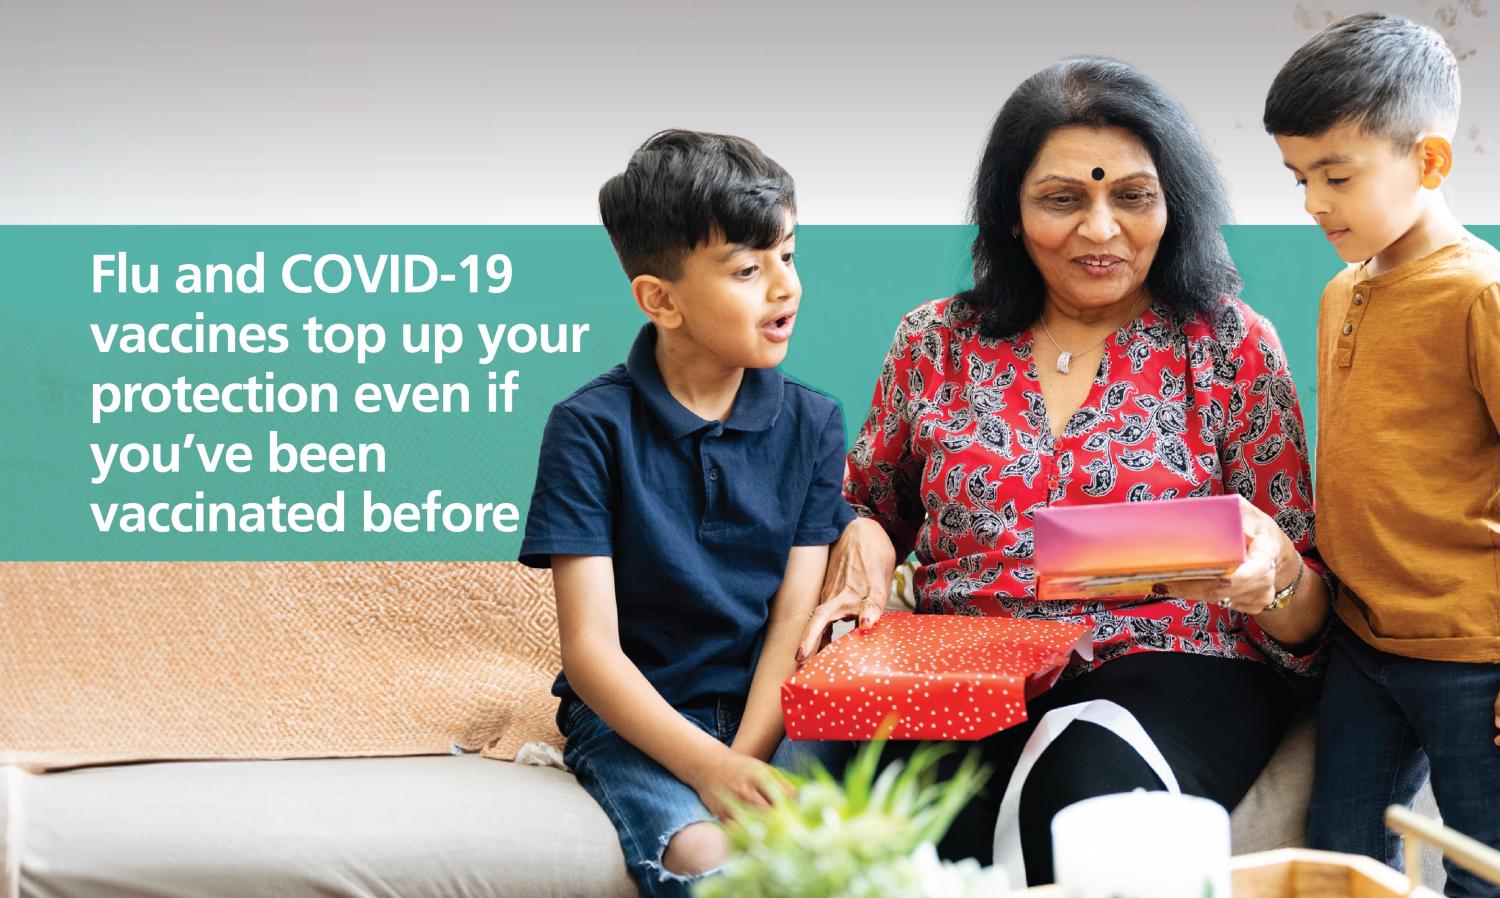 Graphic displaying a women and two young boys with a message encouraging flu and Covid-19 vaccinations